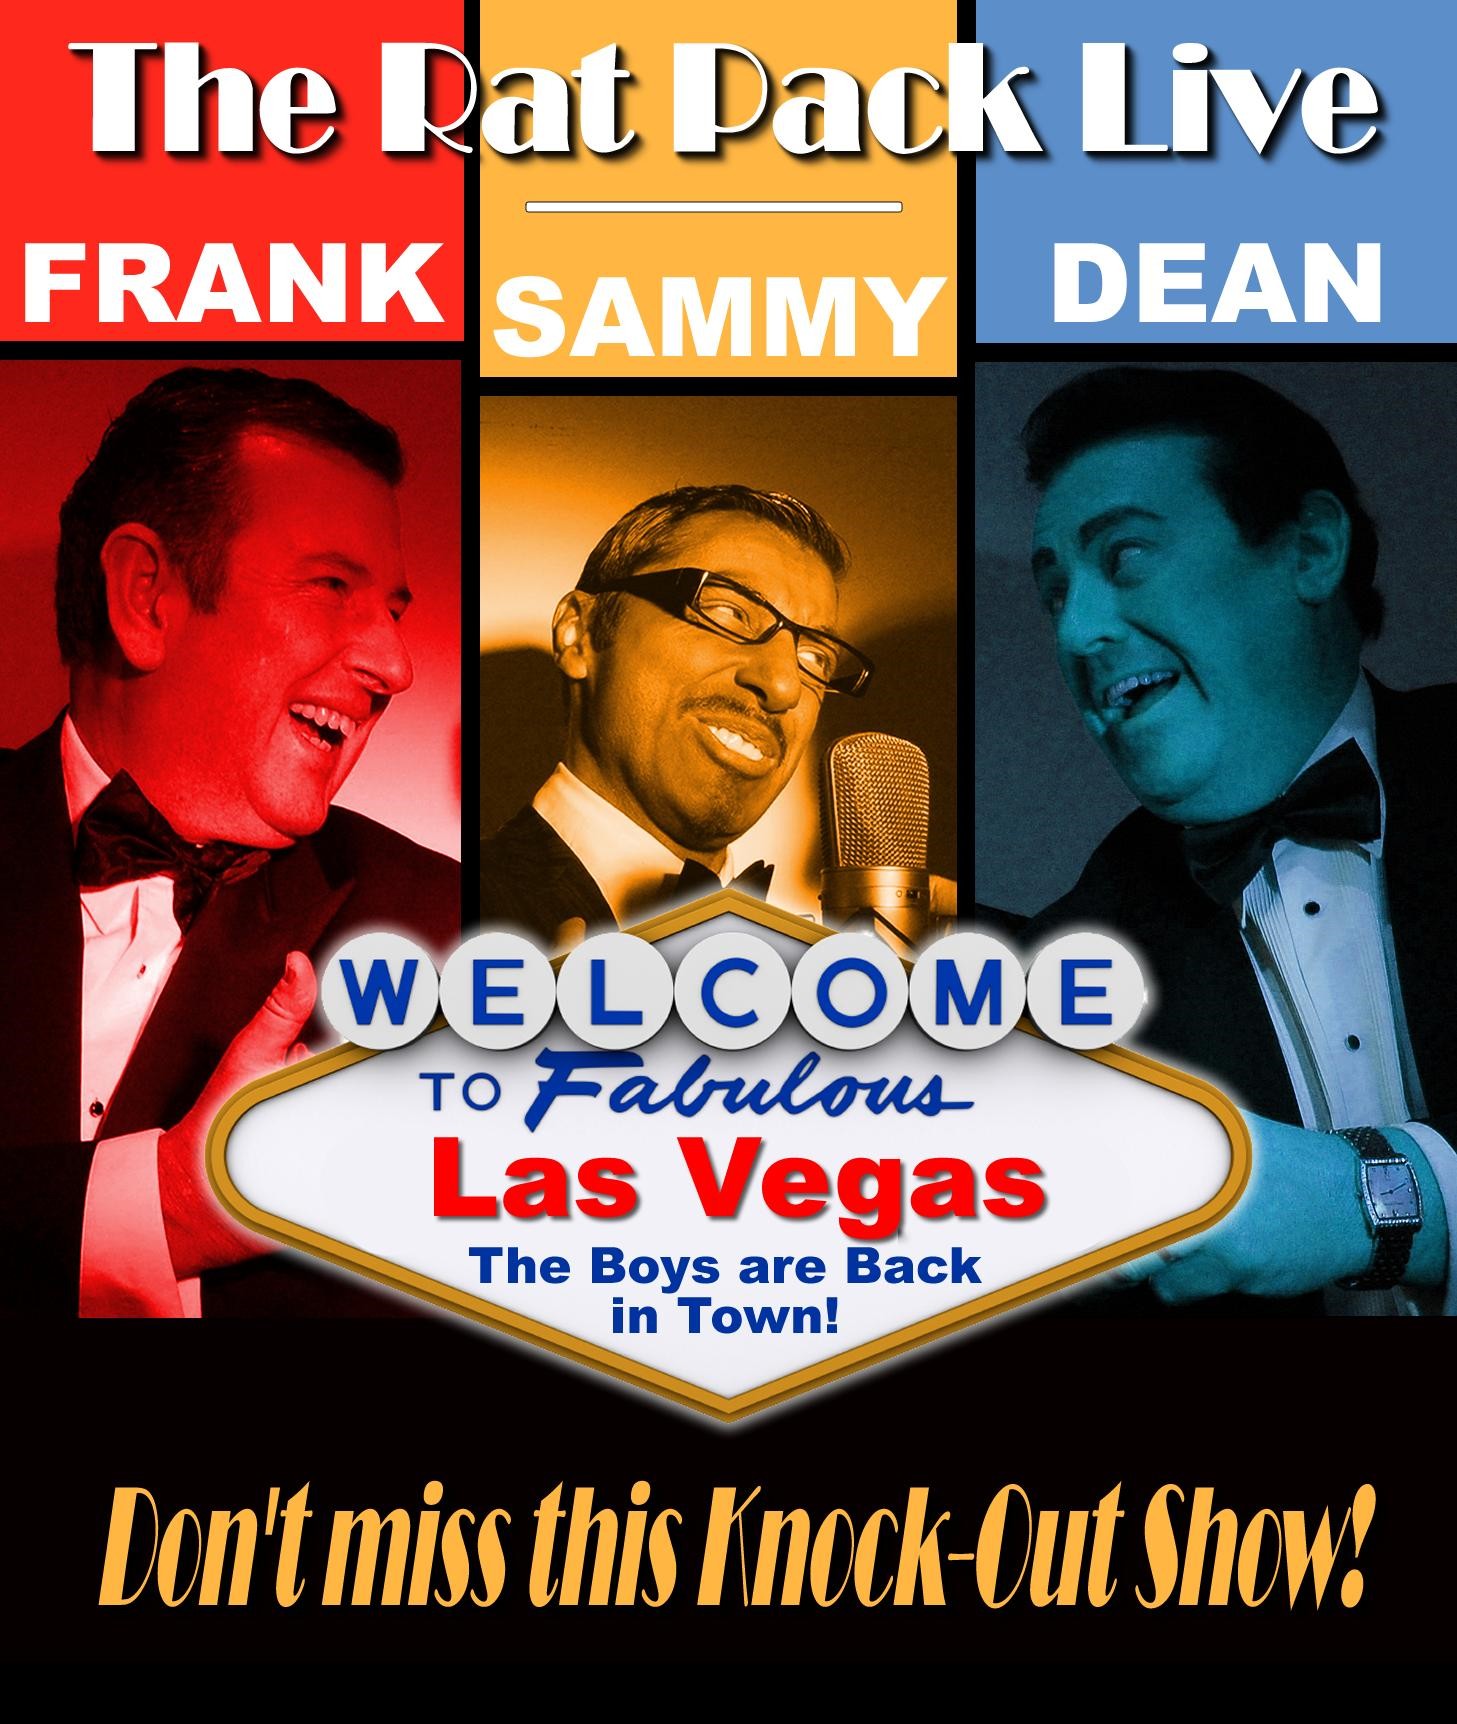 The Rat Pack tribute!